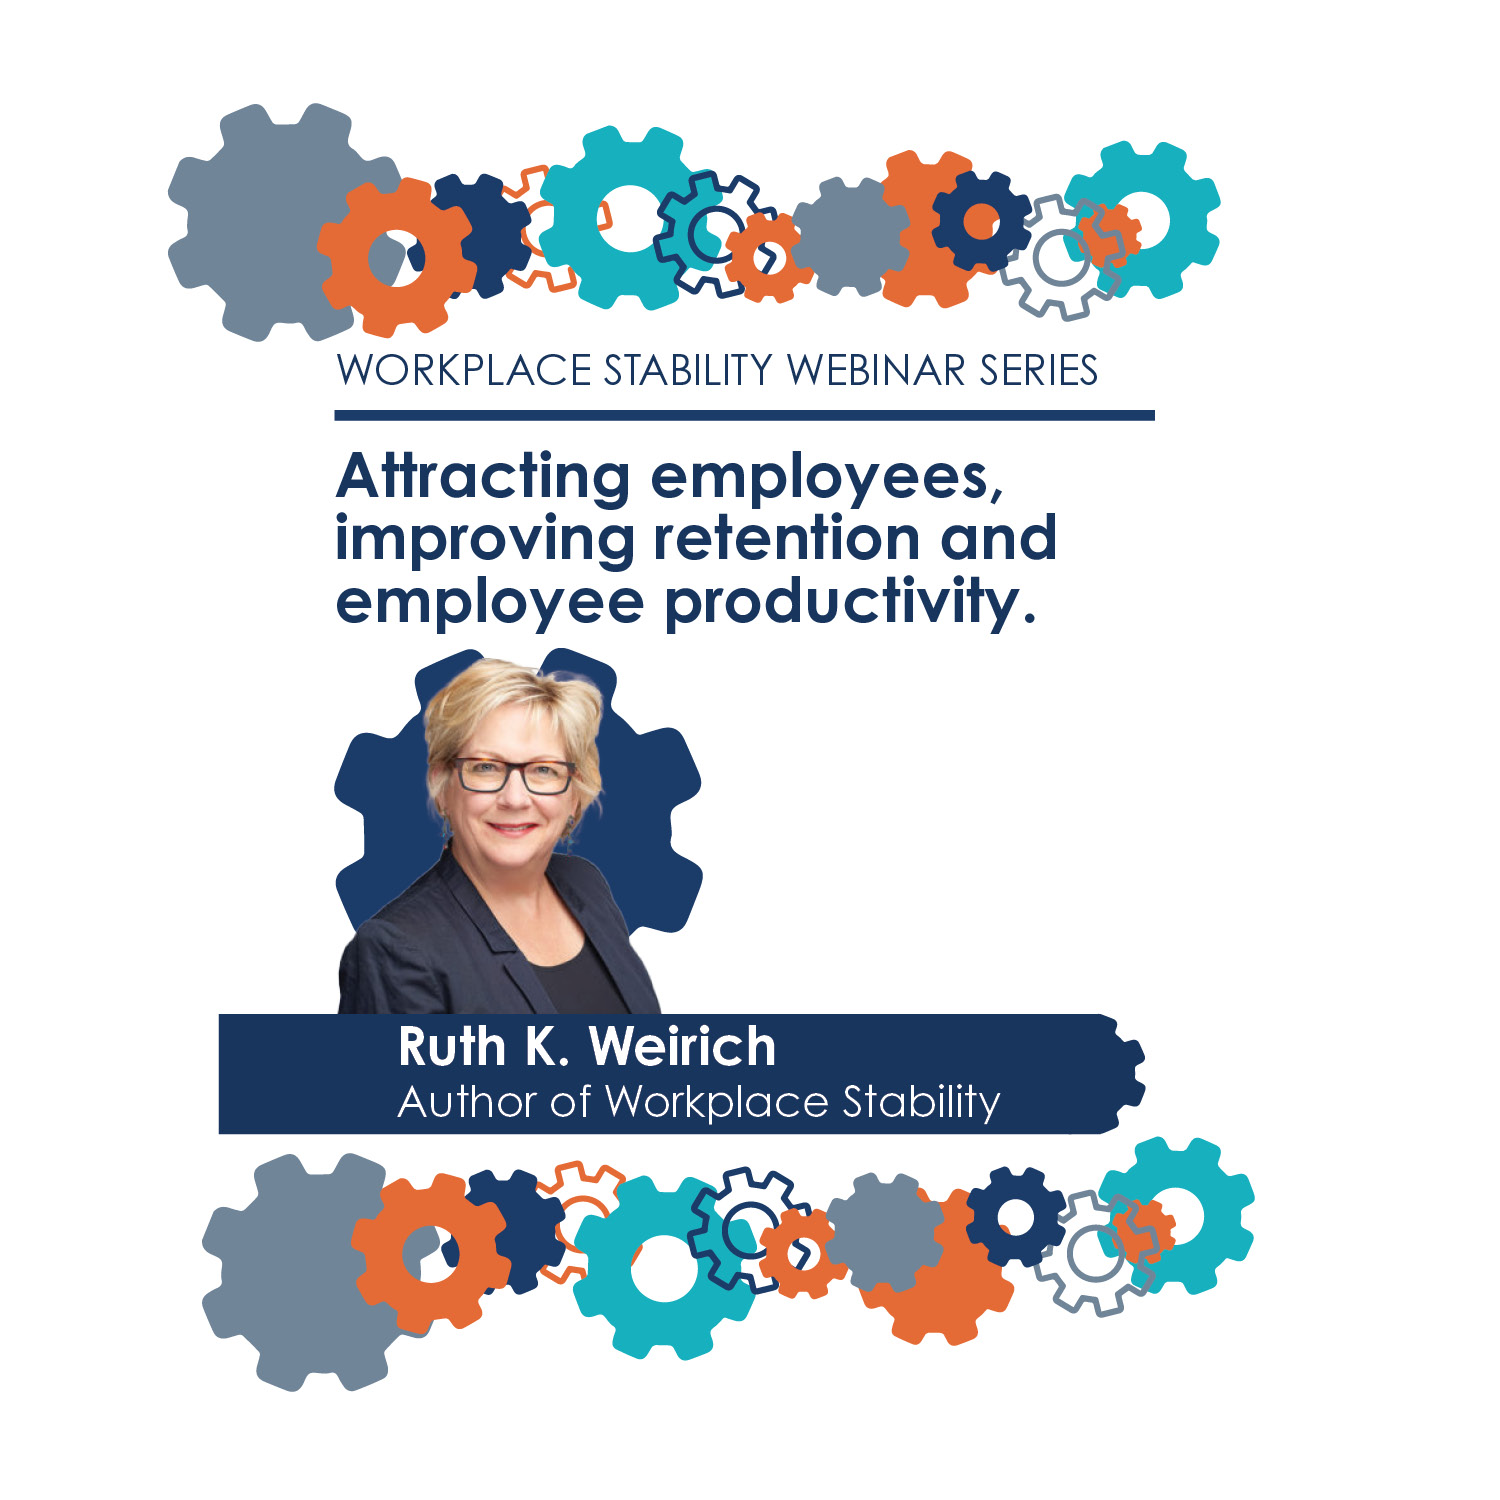 Workplace Stability Webinar 1: Attracting Employees, Improving Retention & Employee Productivity